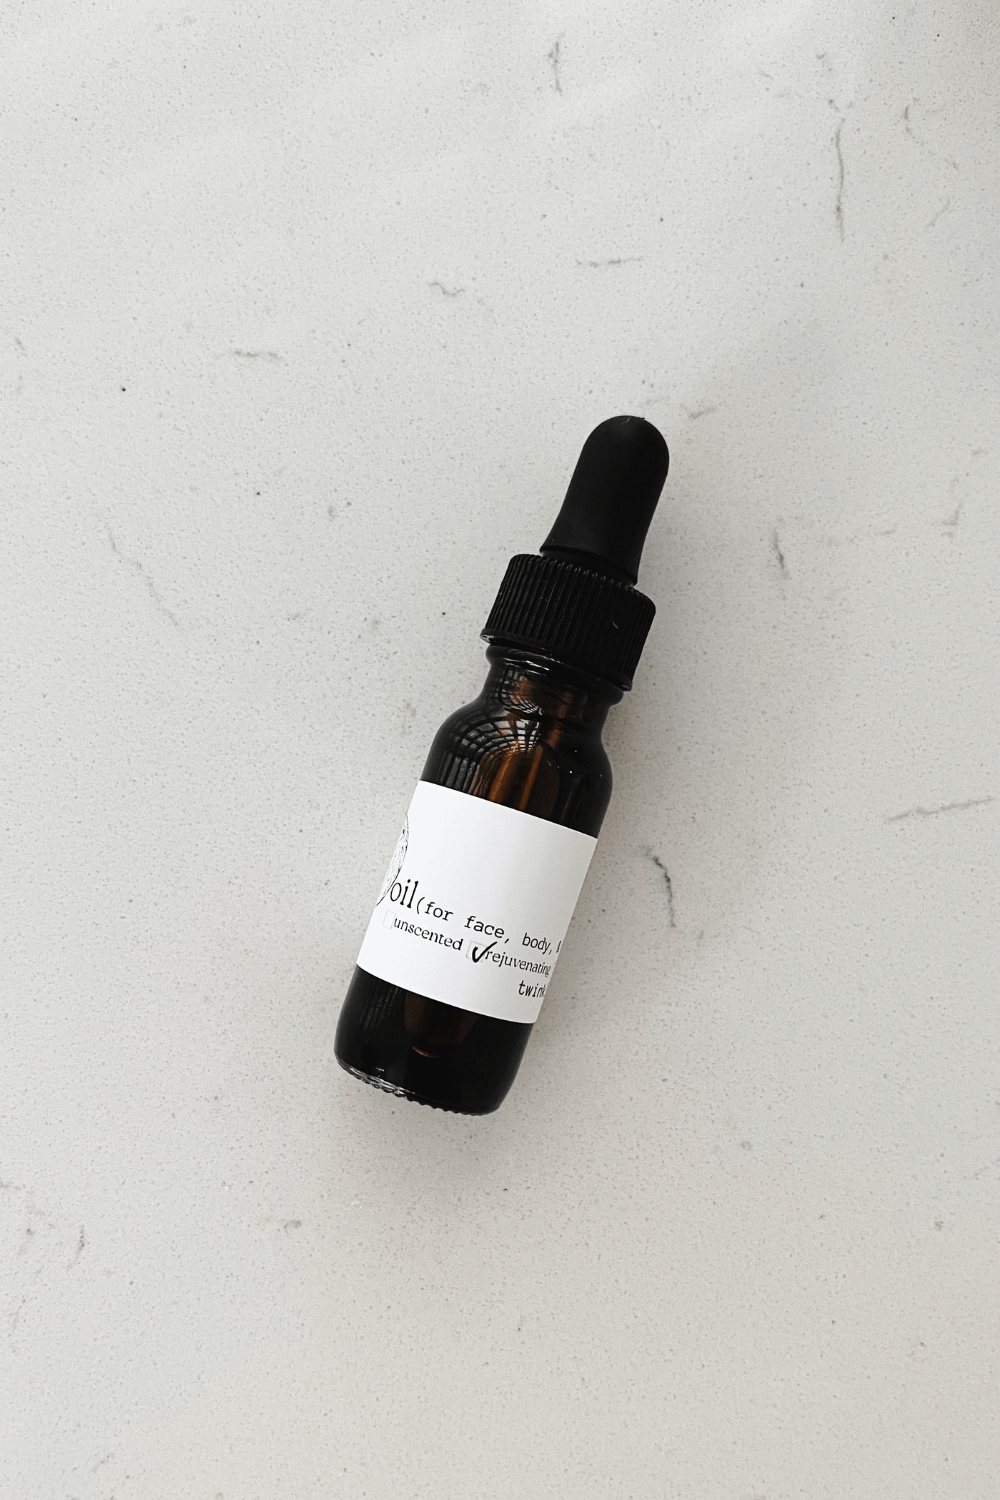 1/2 oz bottle of twinkle apothecary oil for face, body, and hair 